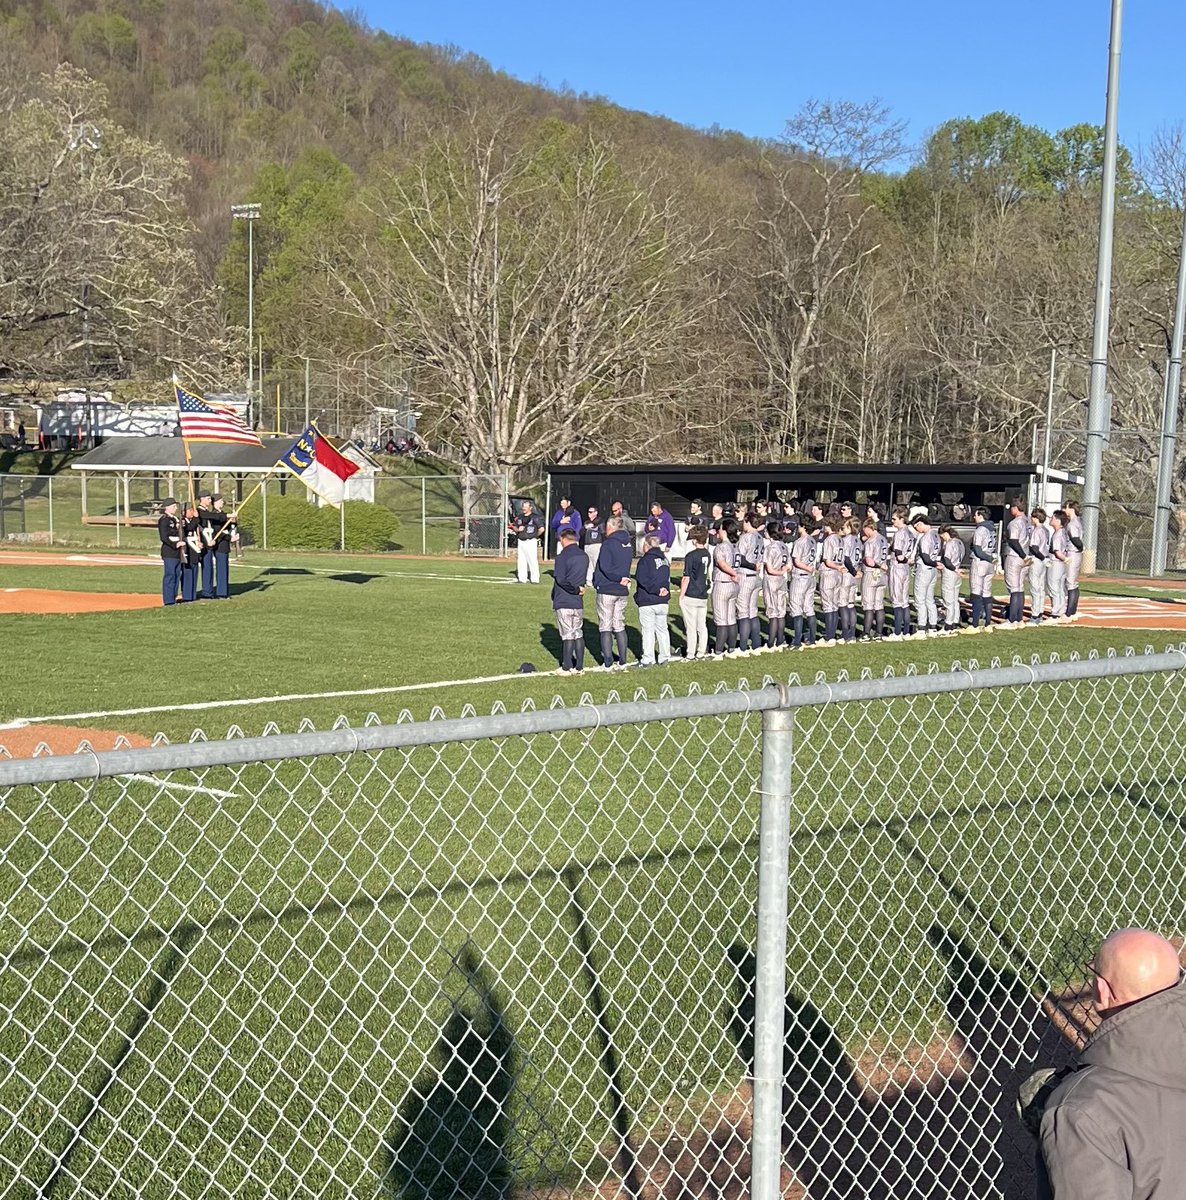 good road win for @GraniteBears ⚾️ over 3A Ashe Co 6-1; @brisongeorge1 gets the “W” allows 3H 1R & 6K; @landongal4 w/Save; 3H night for Cam Wilson & @kamhawkslhp ; at Alleghany next GO 🐻 @granitesquad @AiryBaseball @MABearHistorian @MrCoryLeeSmith @MACSchools